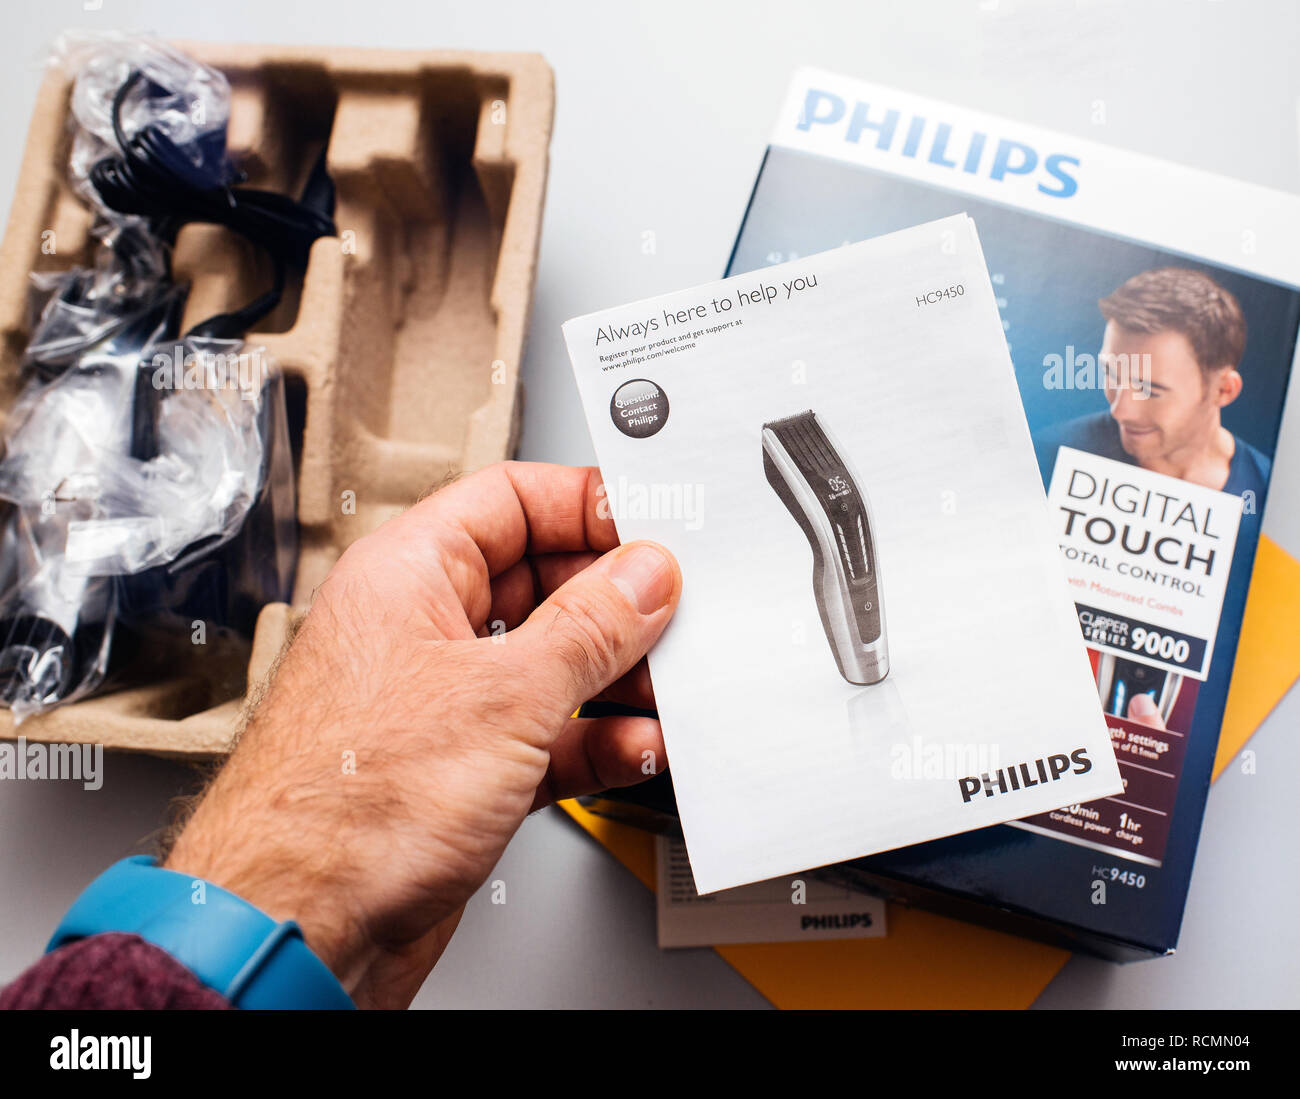 PARIS, FRANCE - FEB 14, 2018: Man unboxing Philips Hair Clipper Series 9000 Professional digital clipper for home use with professional results with motorized combs  Stock Photo